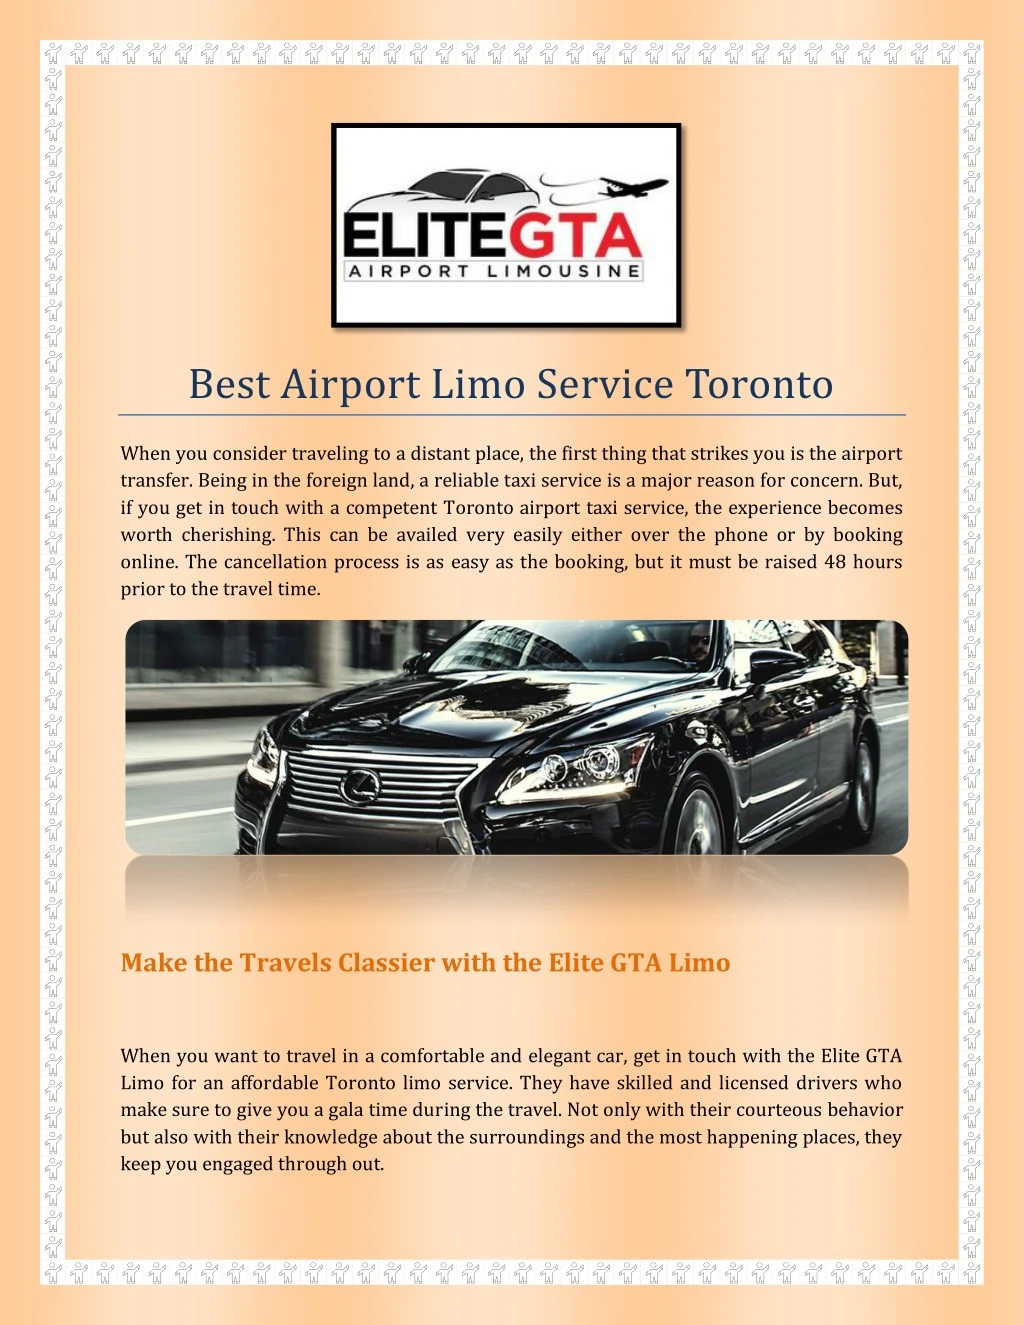 best airport limo service toronto